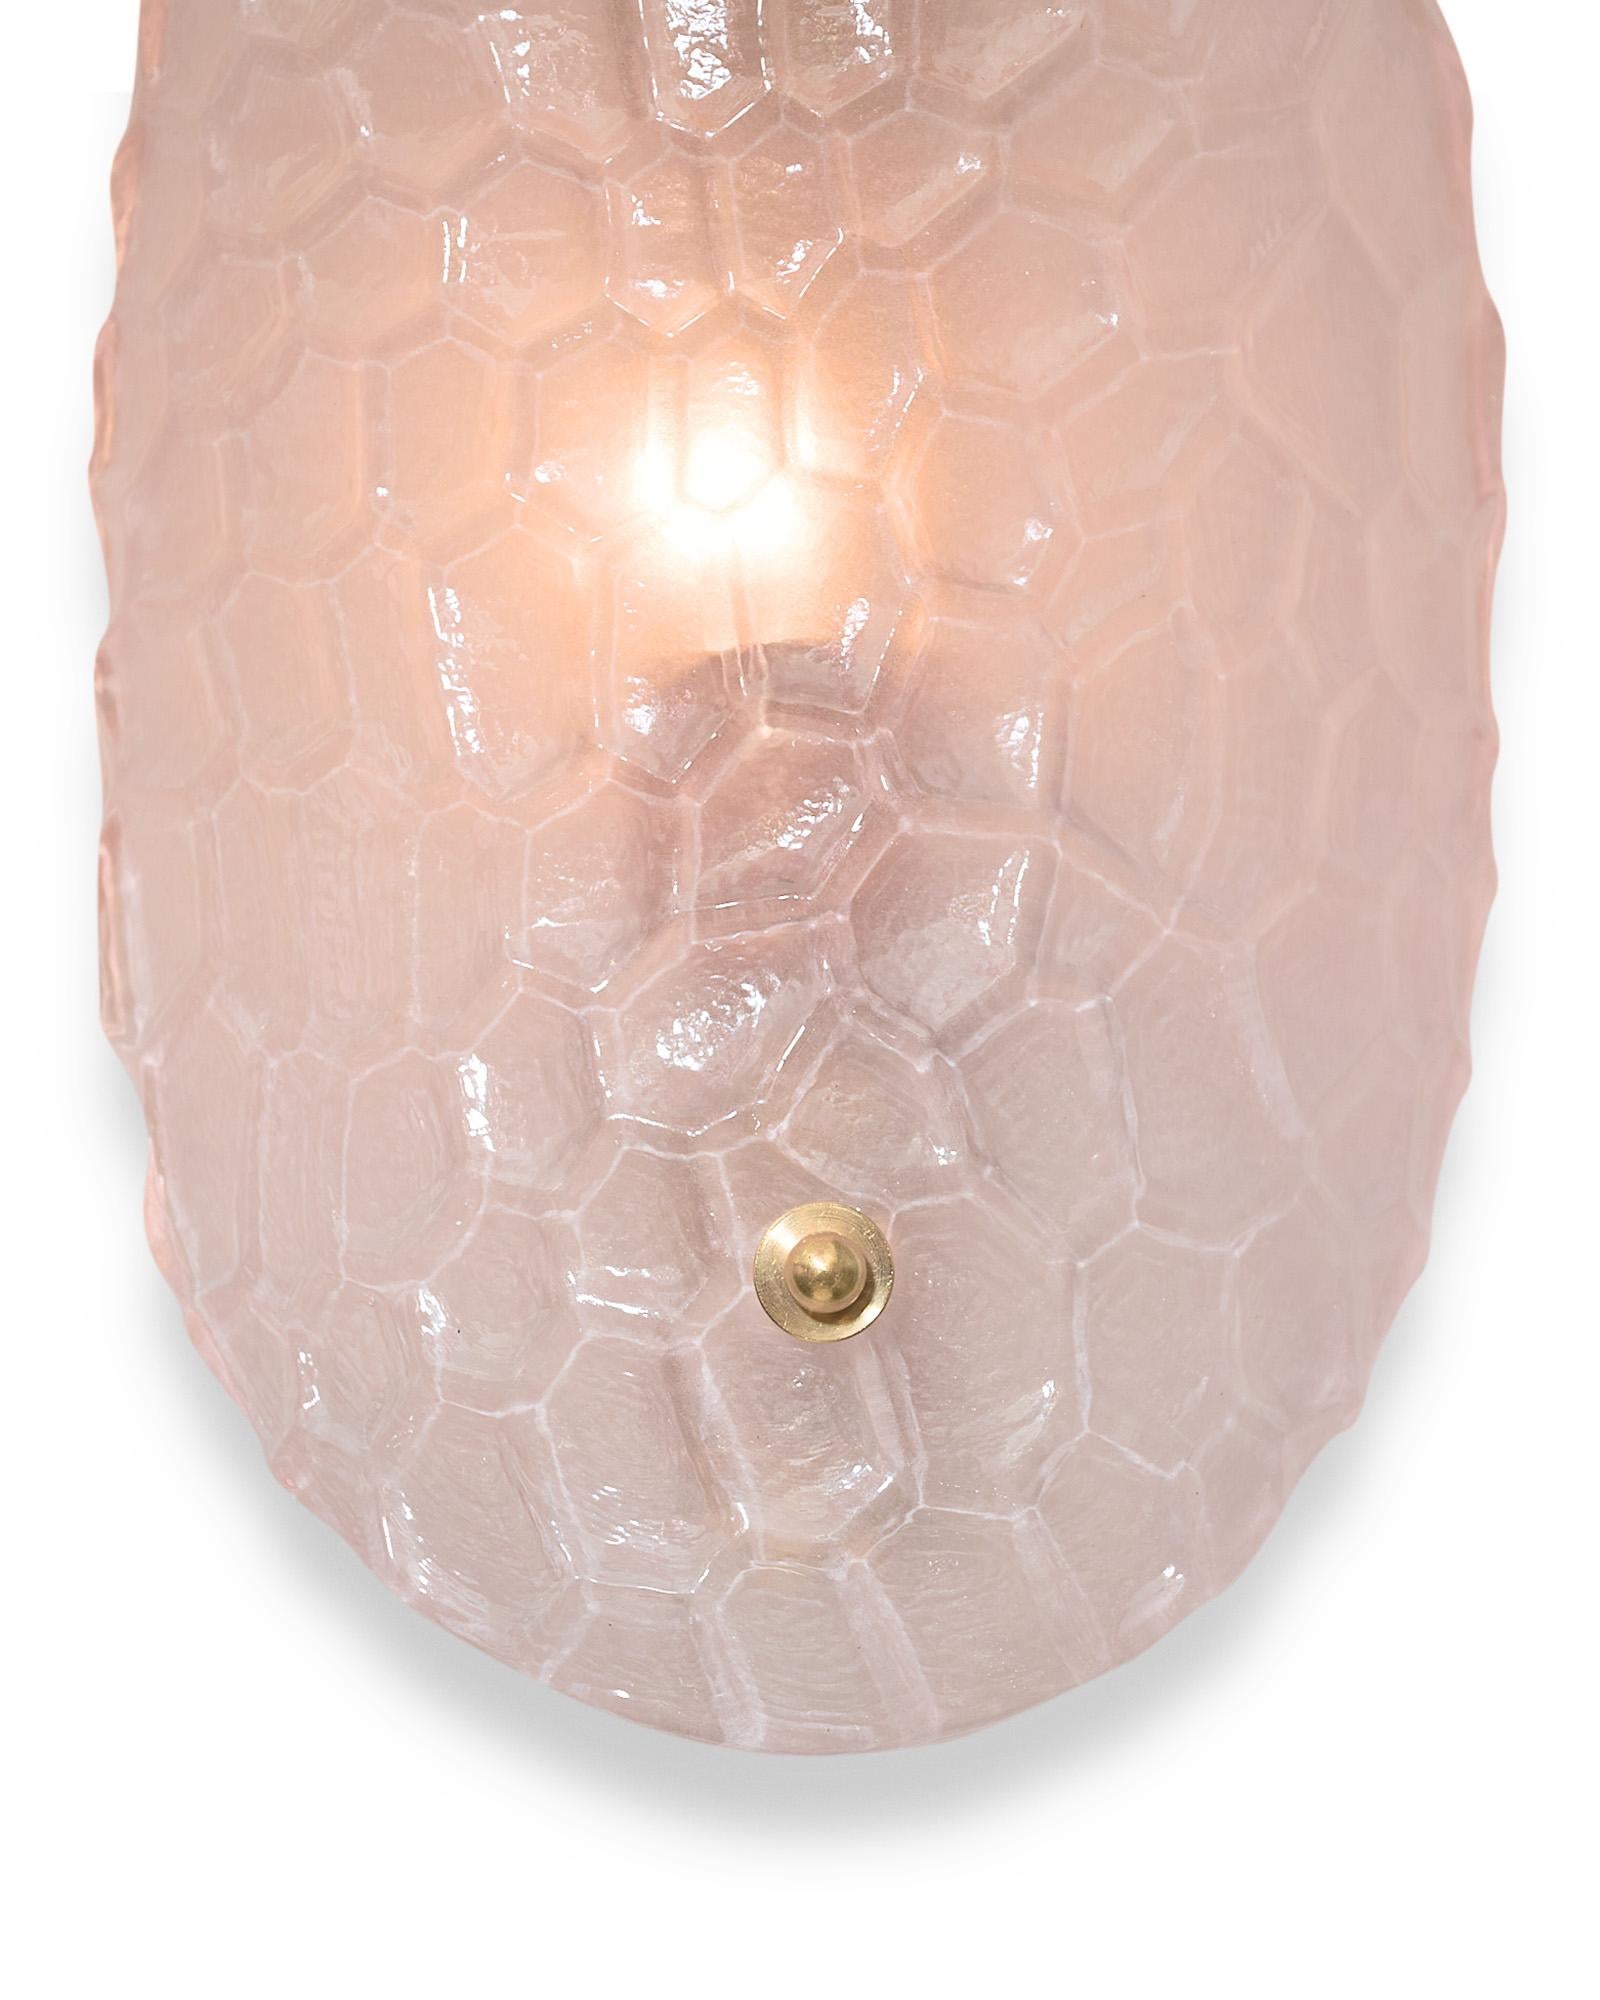 Pair of sconces, Italian, from the island of Murano outside of Venice. This hand-blown pair is made of light pink glass with a “battuto” hammered texture and brass finials. They have been newly wired to fit US standards.